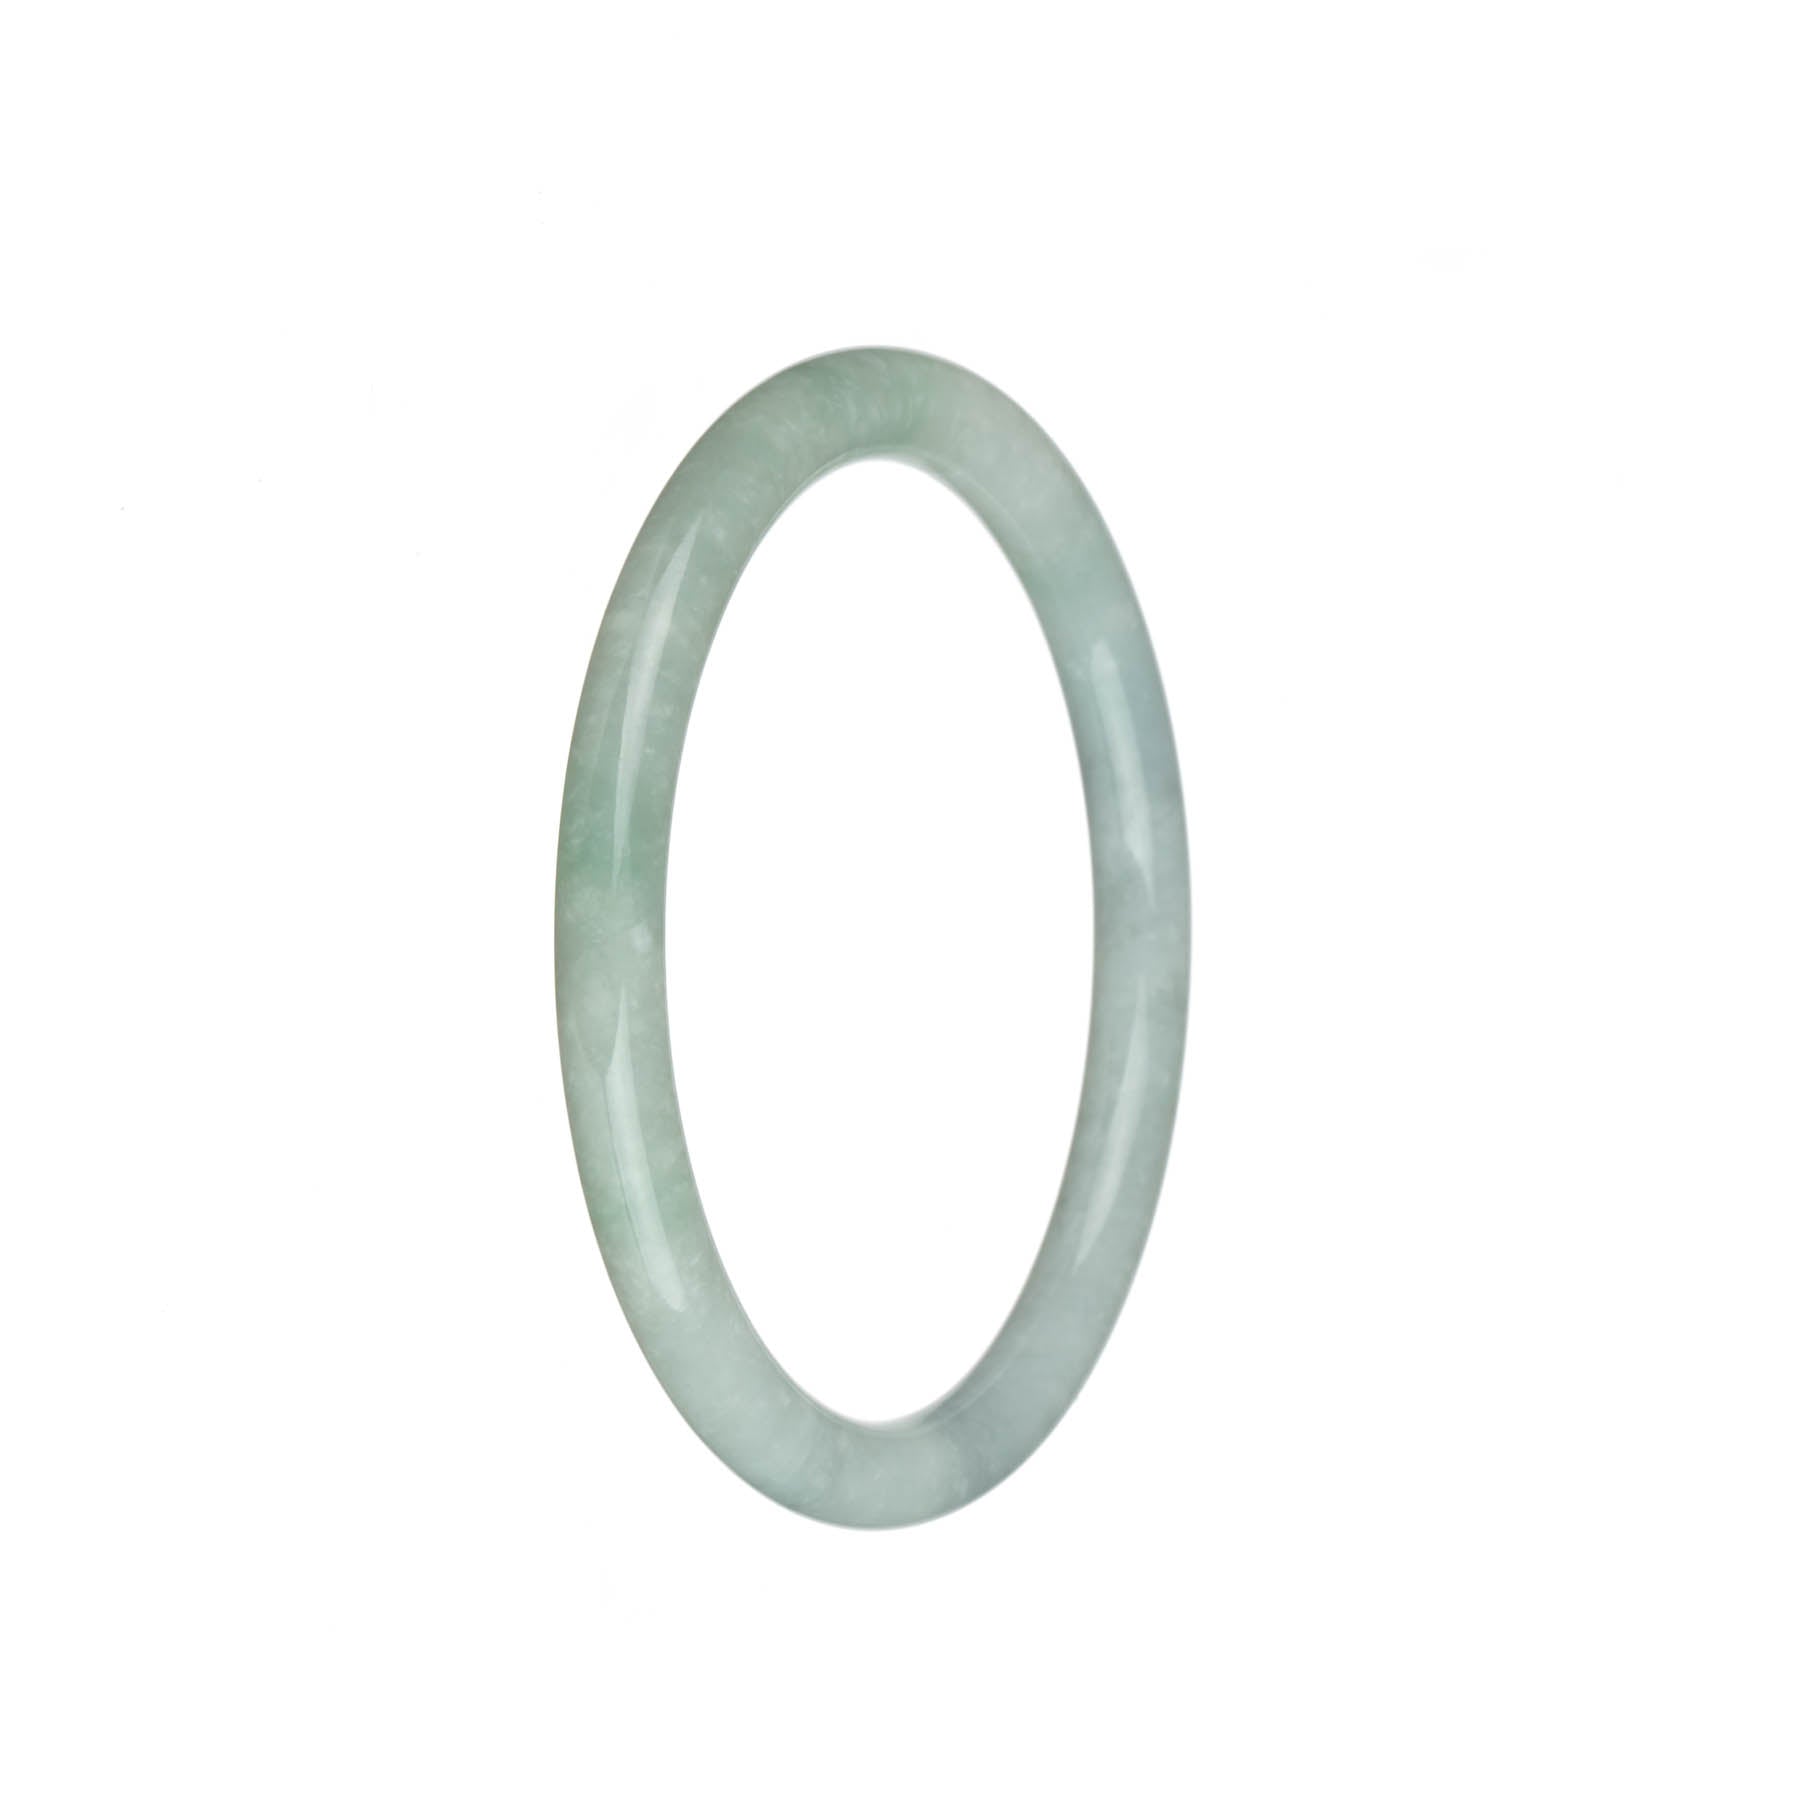 Certified Natural White with Pale Green Traditional Jade Bangle Bracelet - 61mm Petite Round